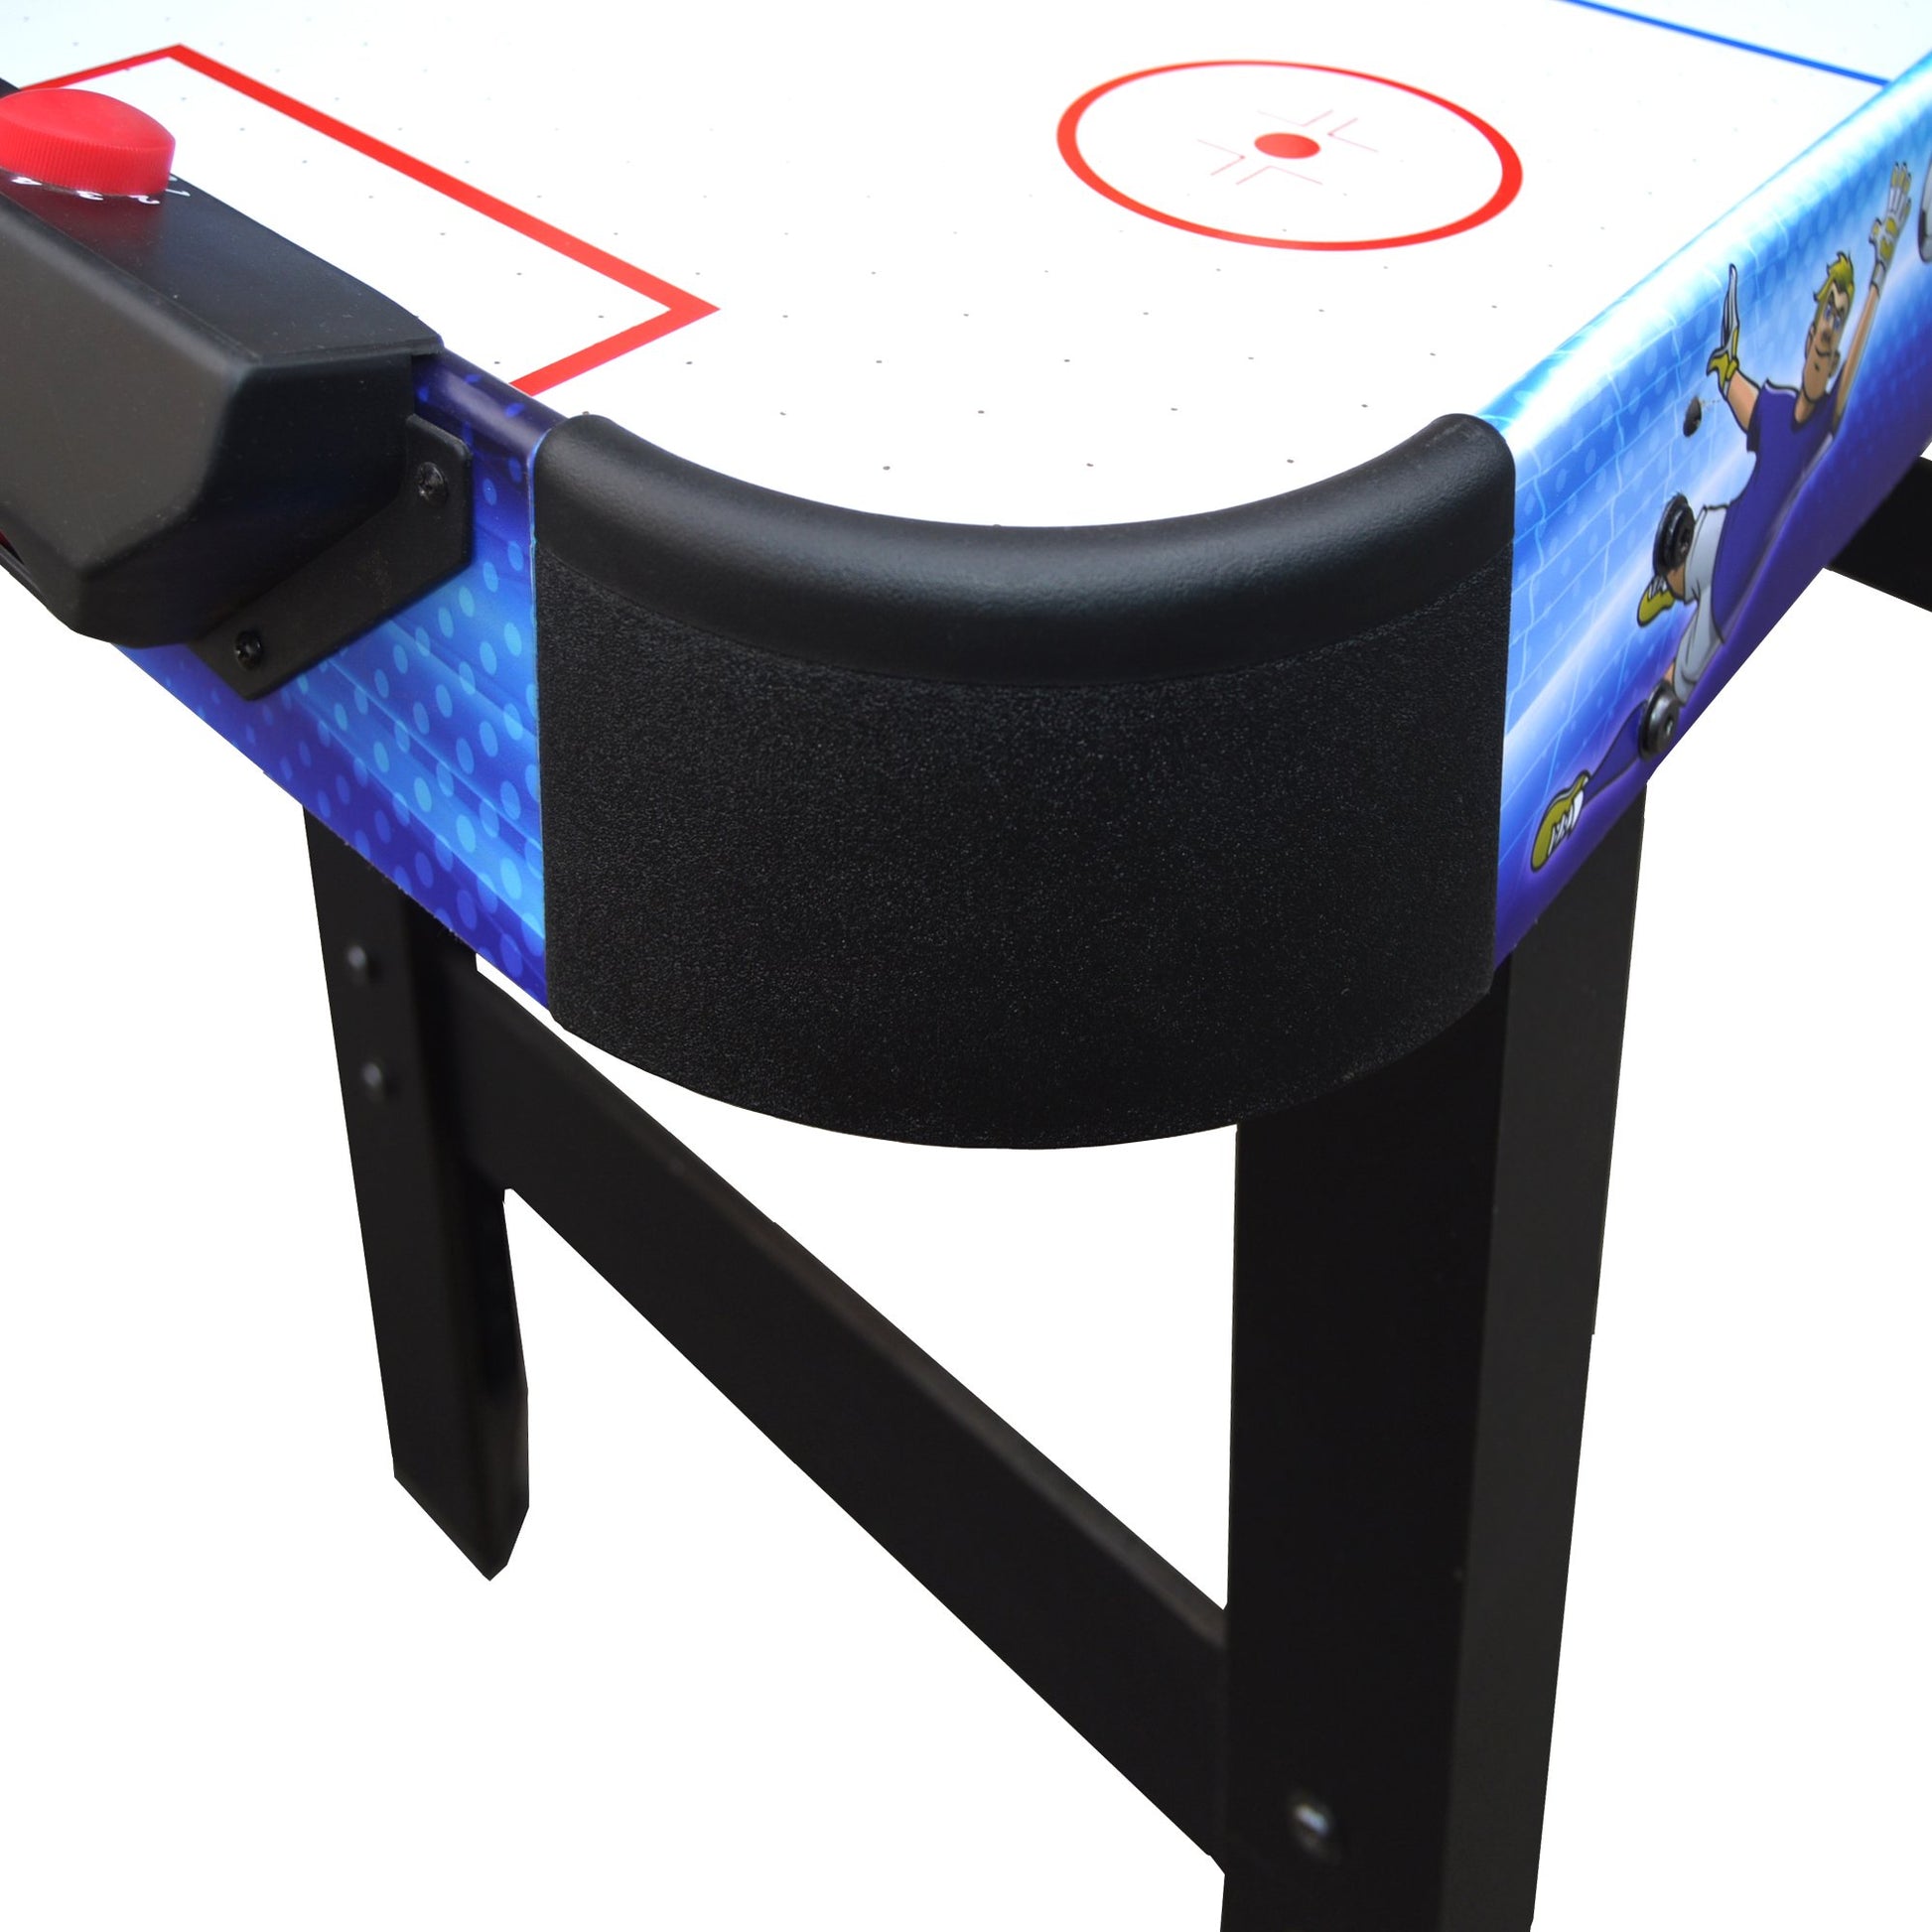 Hathaway Rapid Fire 3 in 1 Air Hockey Multi Game Table - Gaming Blaze